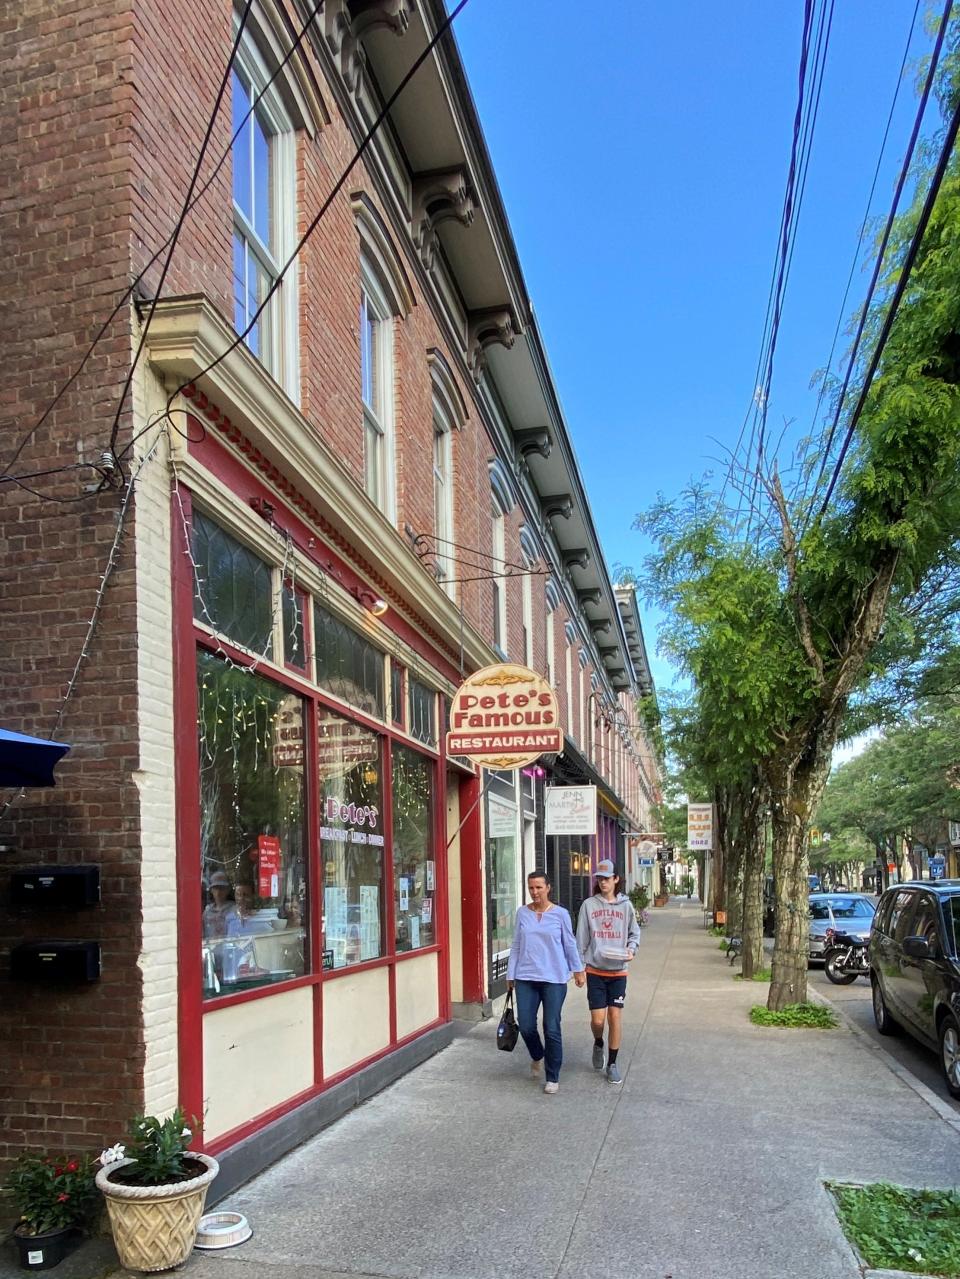 Rhinebeck, N.Y., a charming destination in the Hudson Valley, has welcomed travelers since the late 17th century when it was a crossroads on the King’s Highway and Sepasco Indian Trail. The shaded village features more than 40 specialty shops, eateries and inns.